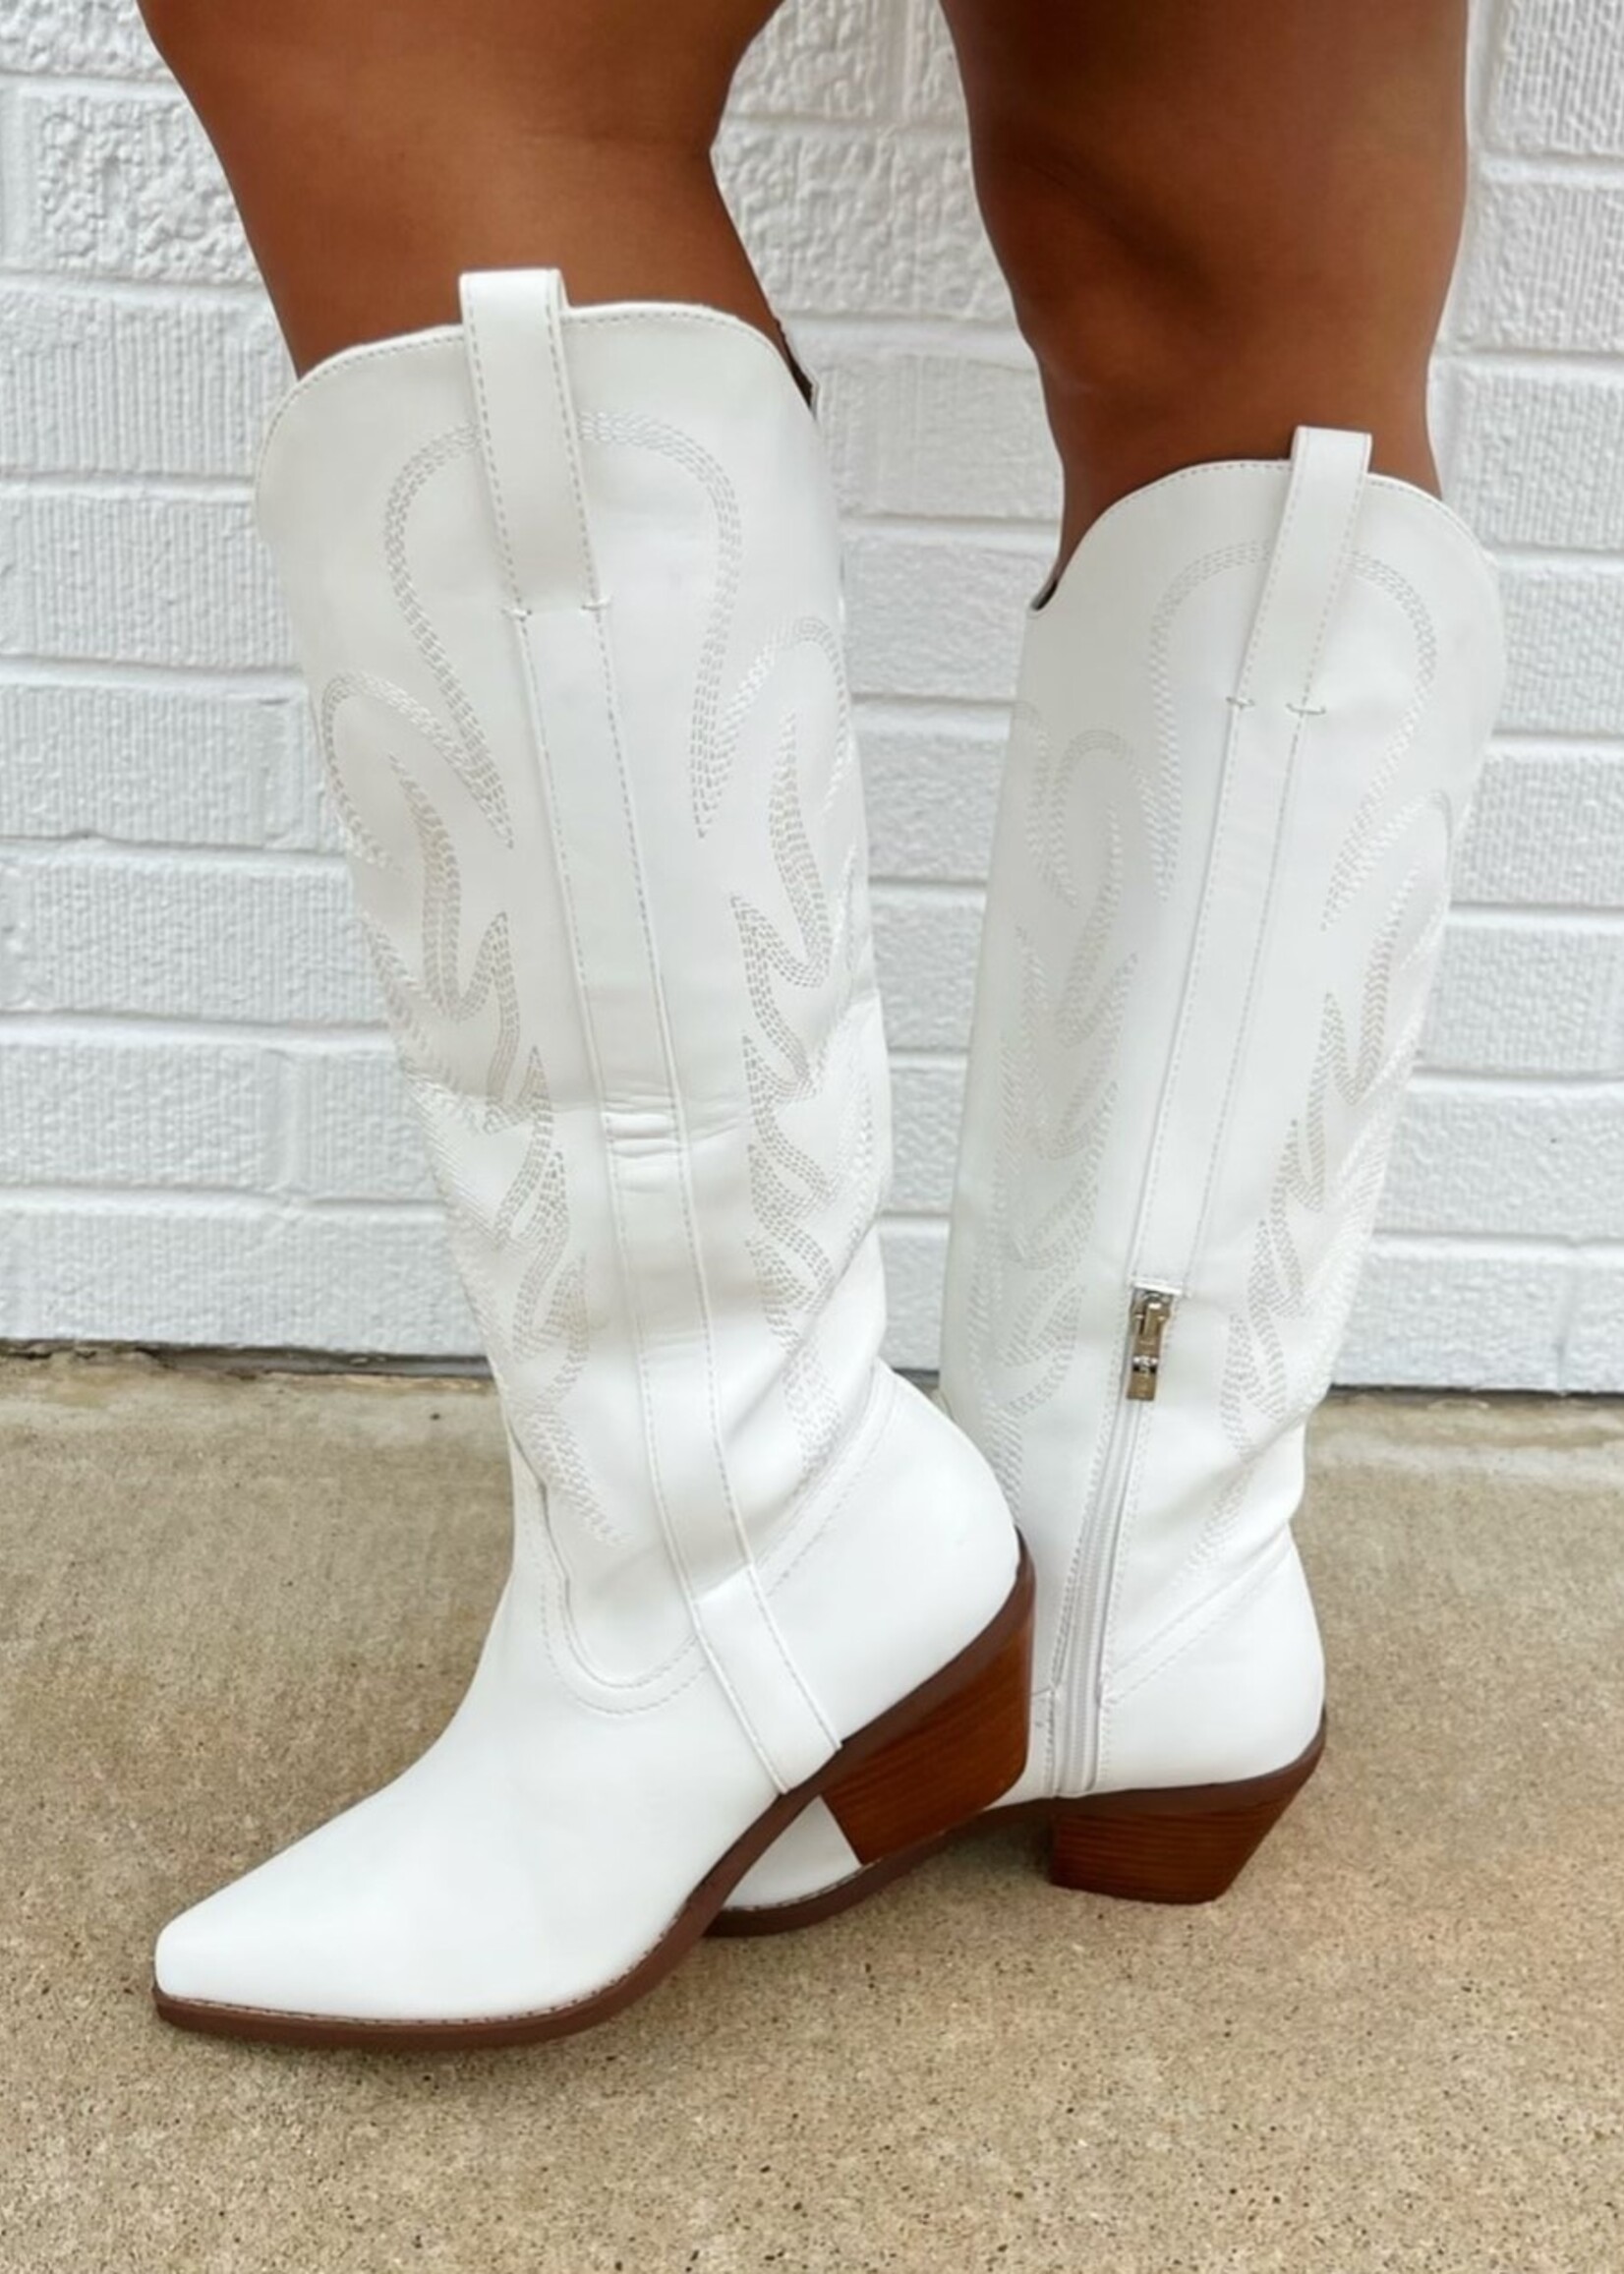 Bloom and Company Mirage White Cowboy Boots